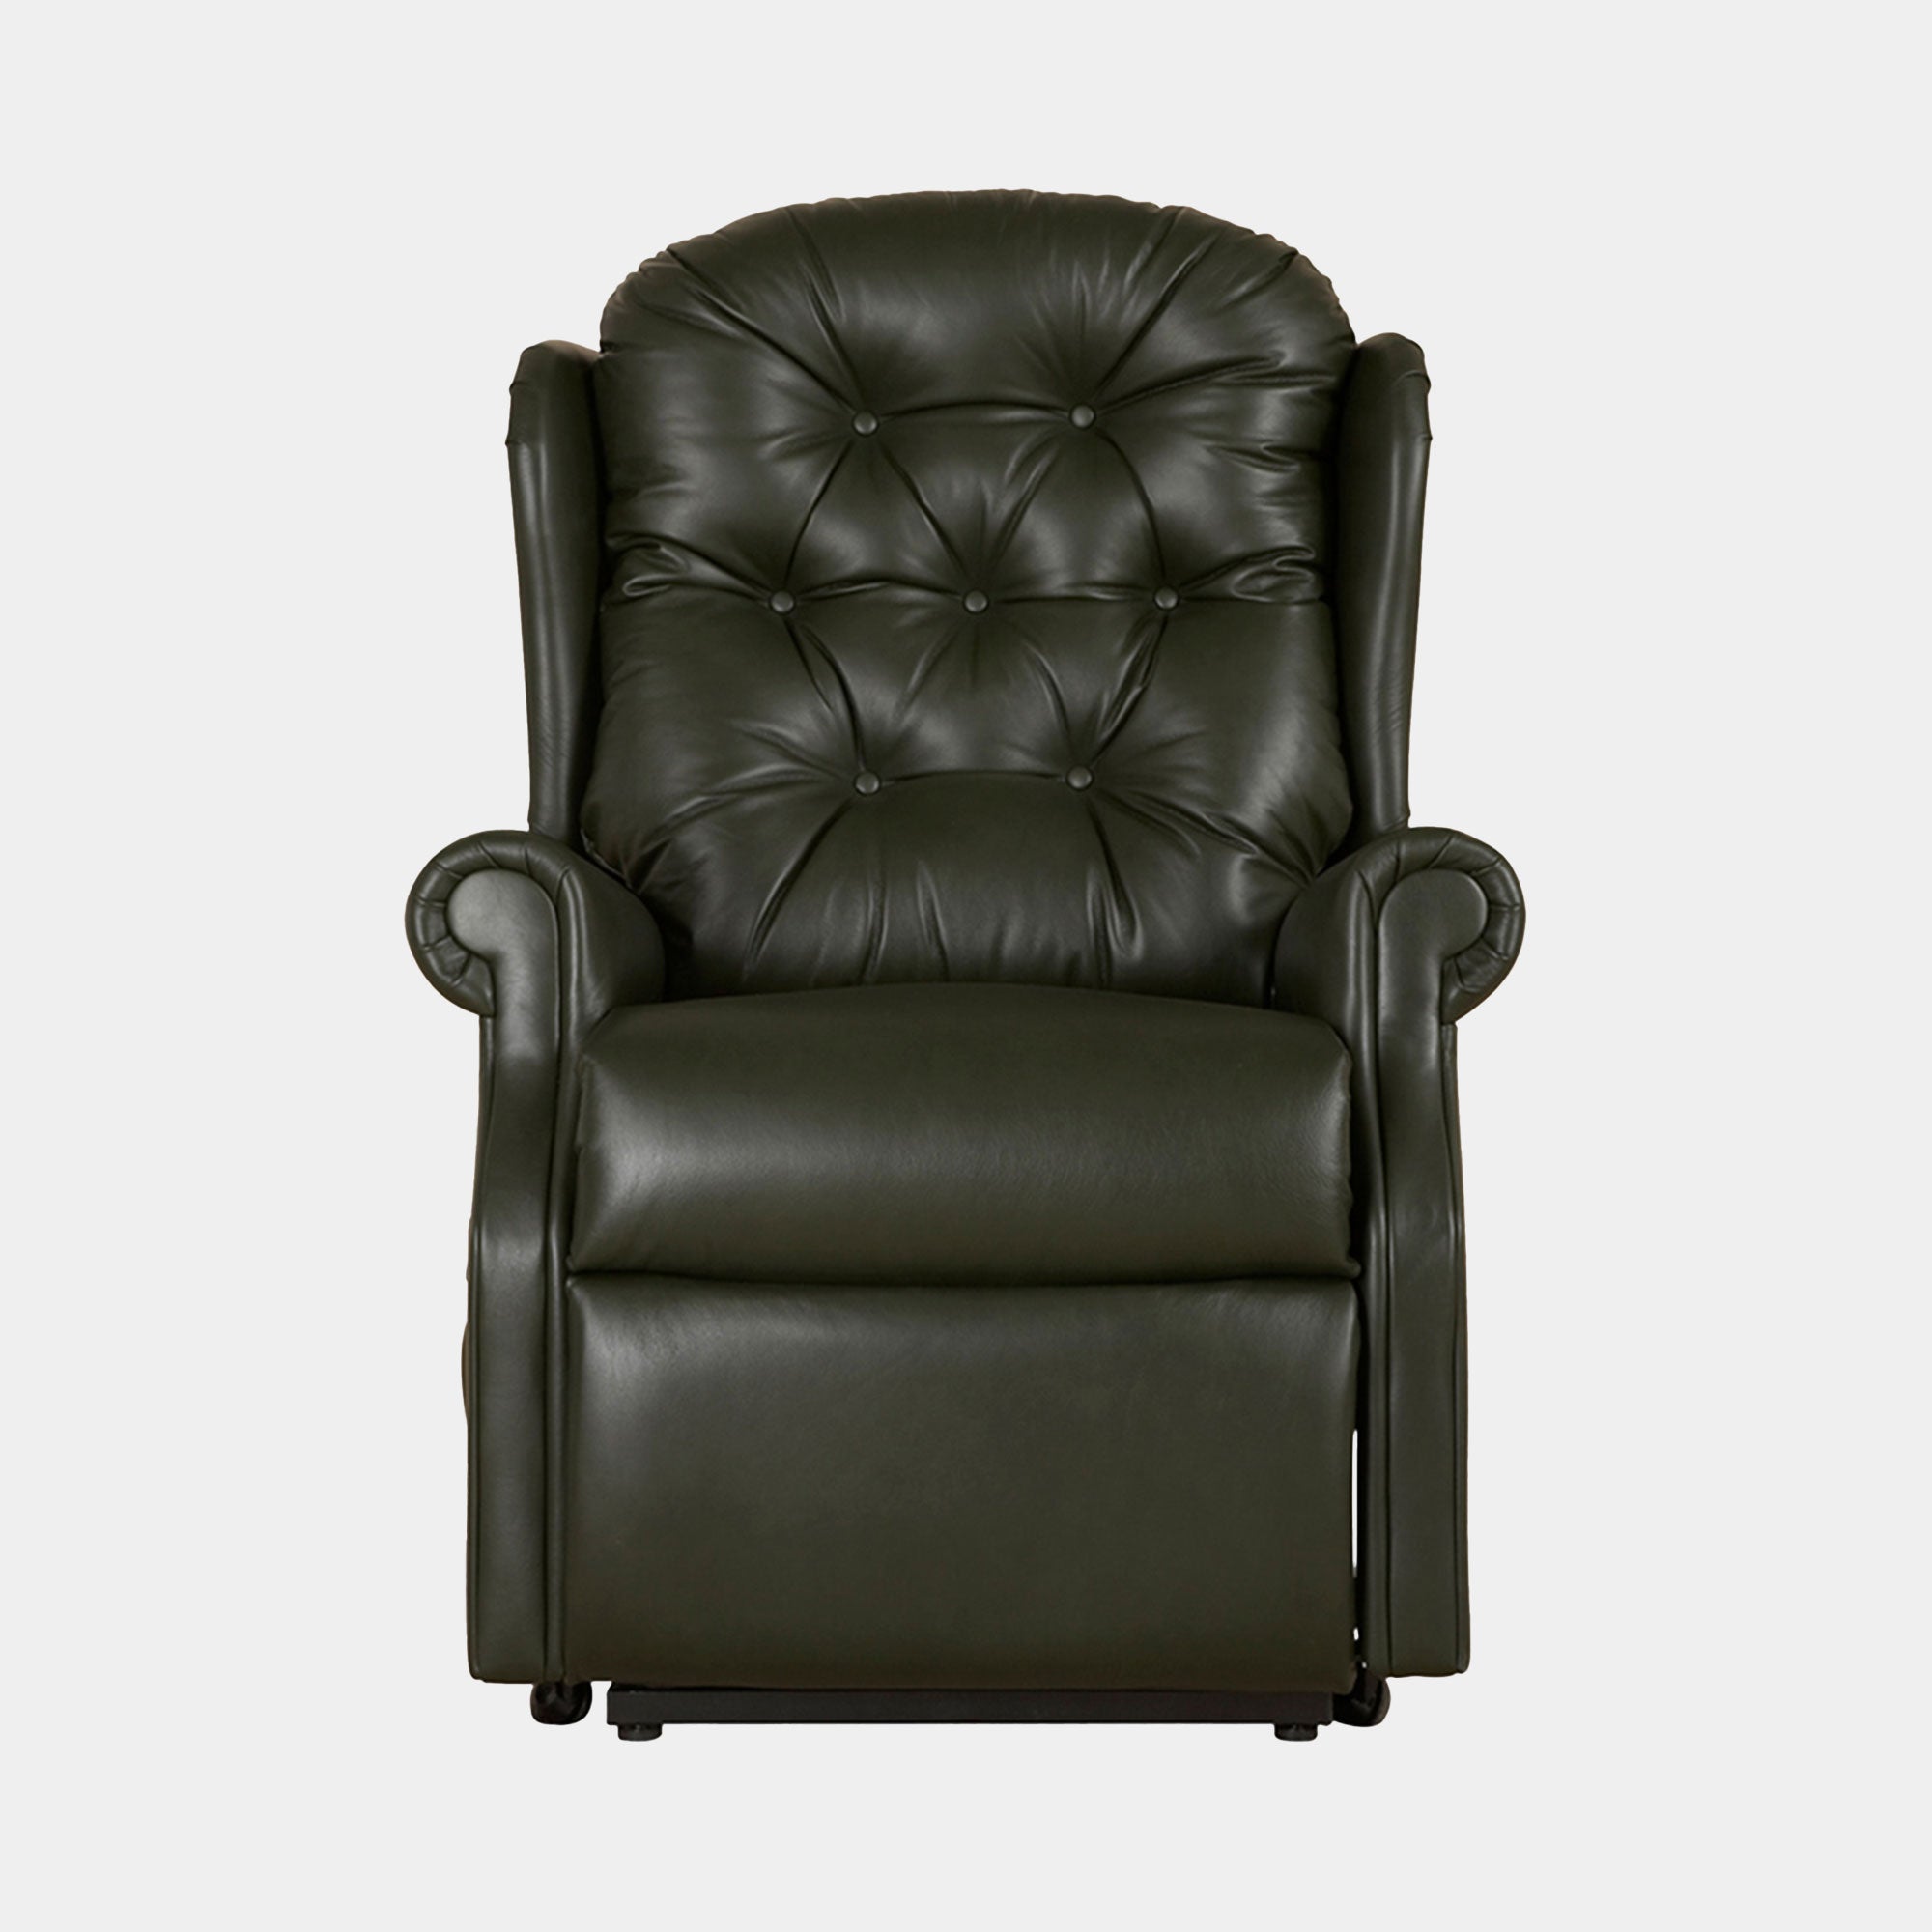 New Burford - Standard Fixed Chair In Leather